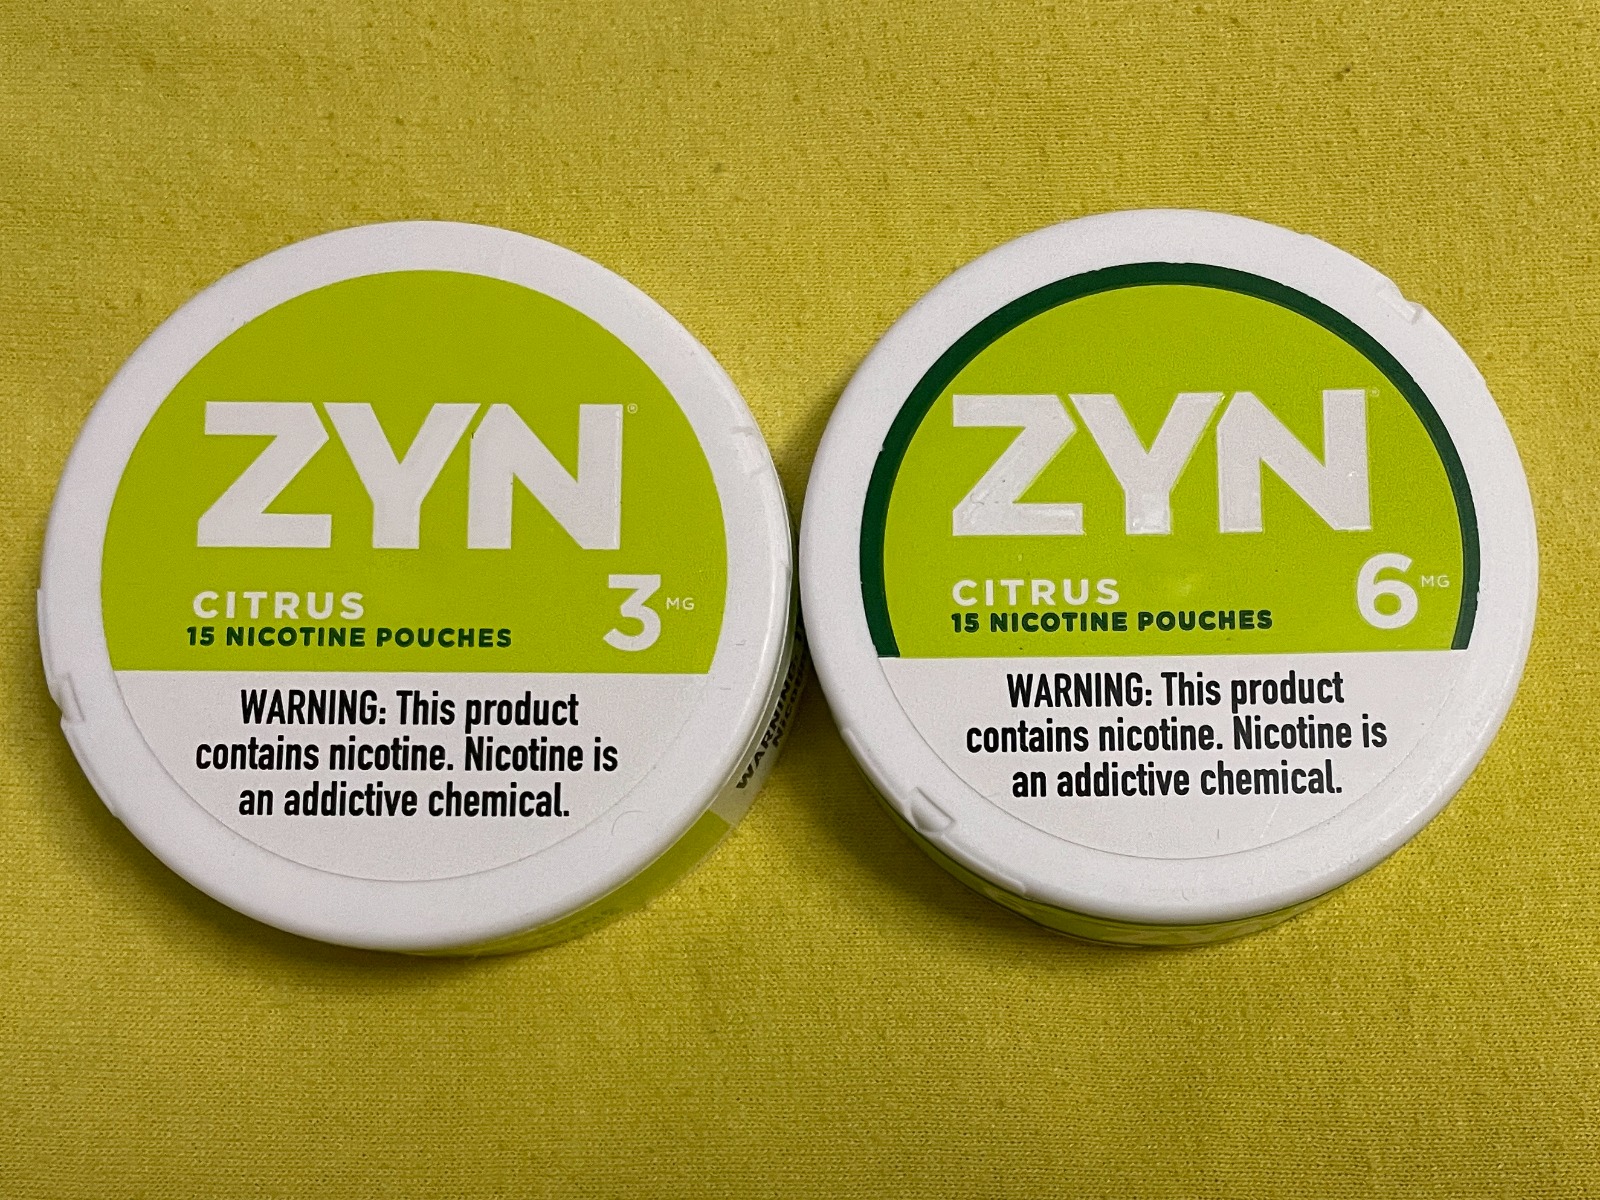 How to use ZYN Nicotine Pouches [Complete Guide] - Swenico